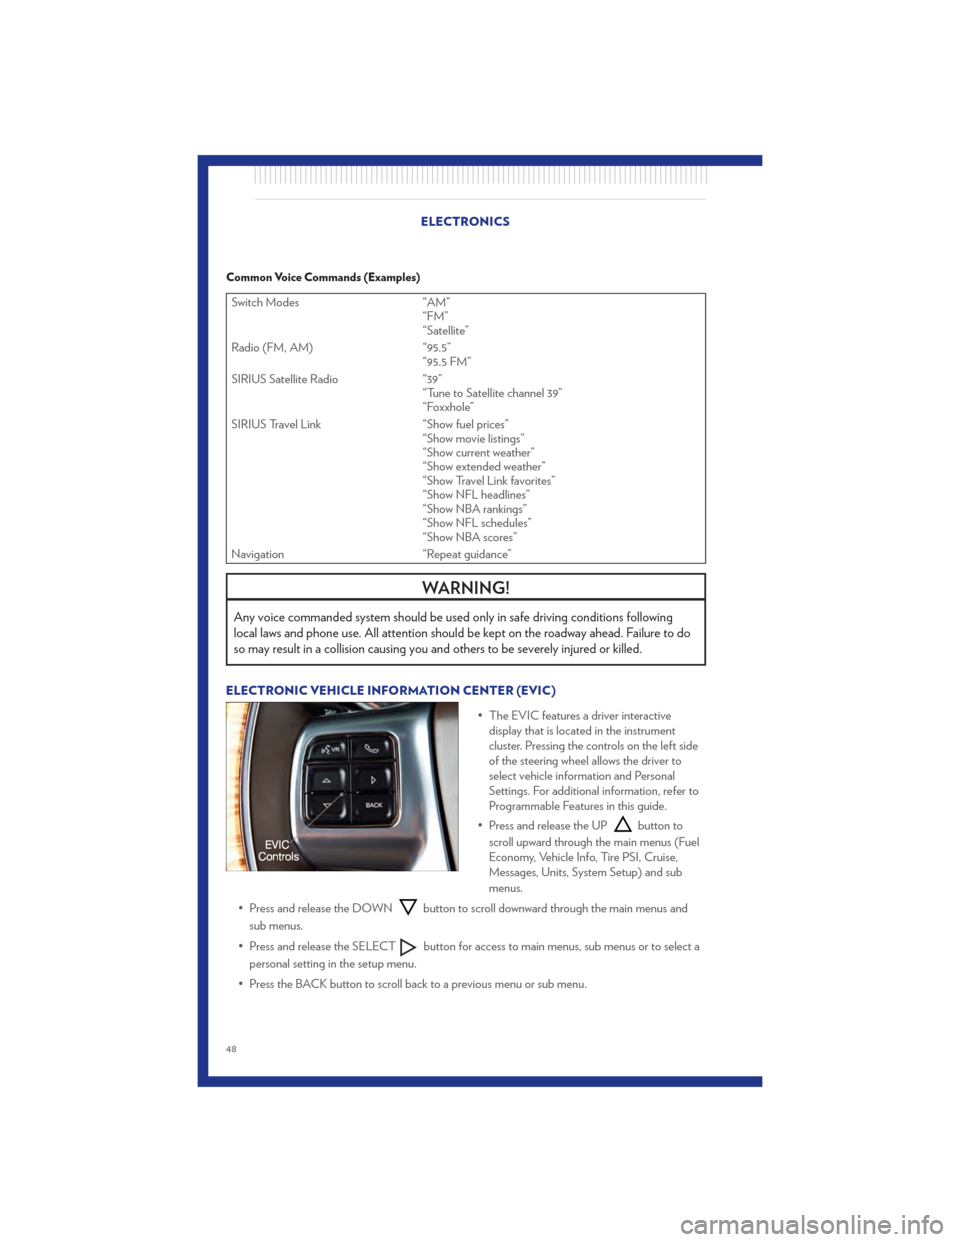 CHRYSLER 300 2011 2.G User Guide Common Voice Commands (Examples)
Switch Modes“AM”
“FM”
“Satellite”
Radio (FM, AM) “95.5”
“95.5 FM”
SIRIUS Satellite Radio “39”
“Tune to Satellite channel 39”
“Foxxhole”